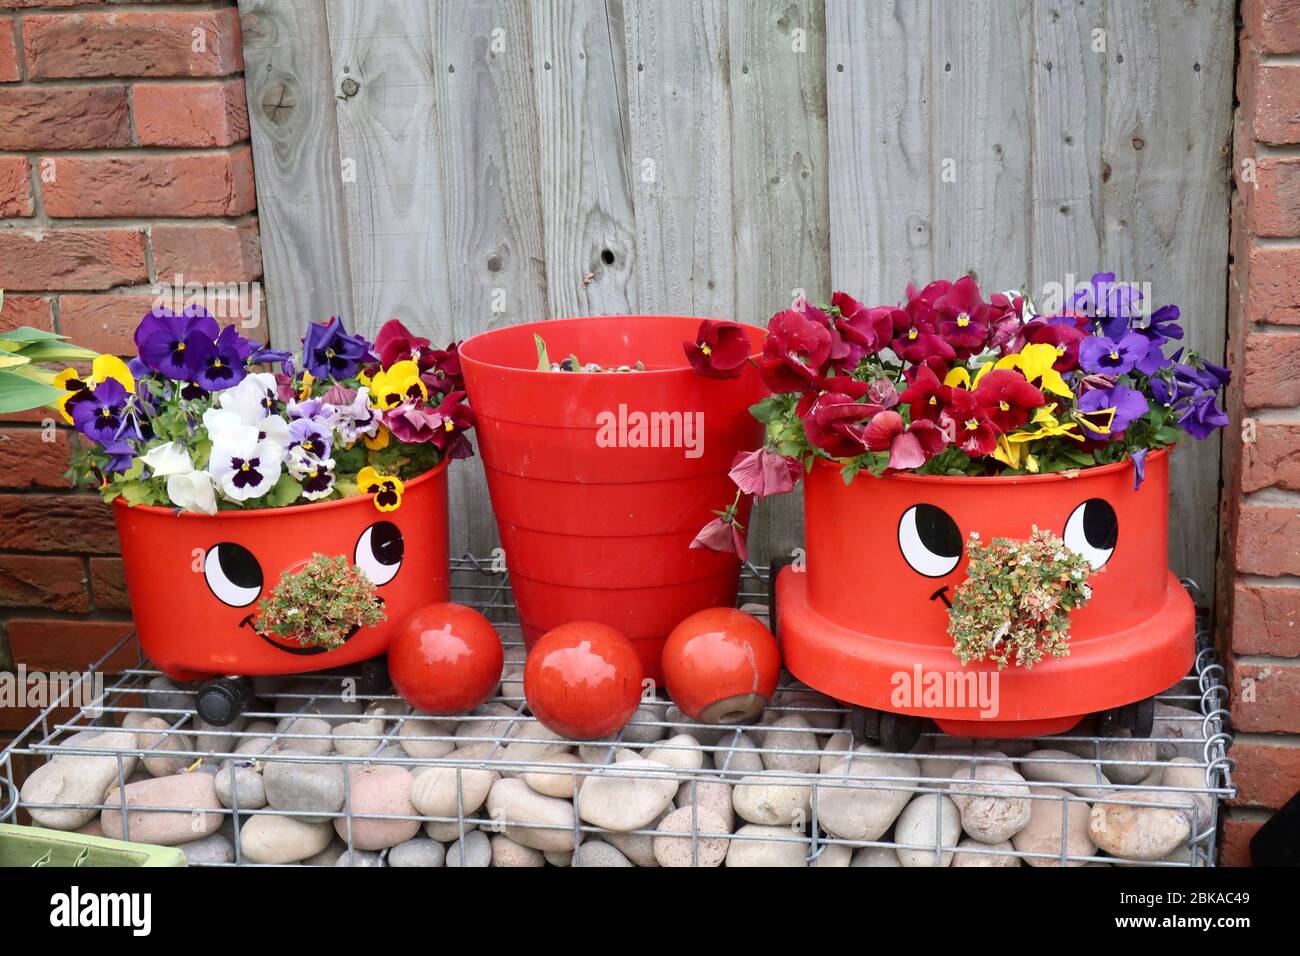 Ipswich, Suffolk, UK - 3 May 2020: Henry Hoover vacuum cleaners rescued from the tip and used to display brightly coloured pansies. Stock Photo